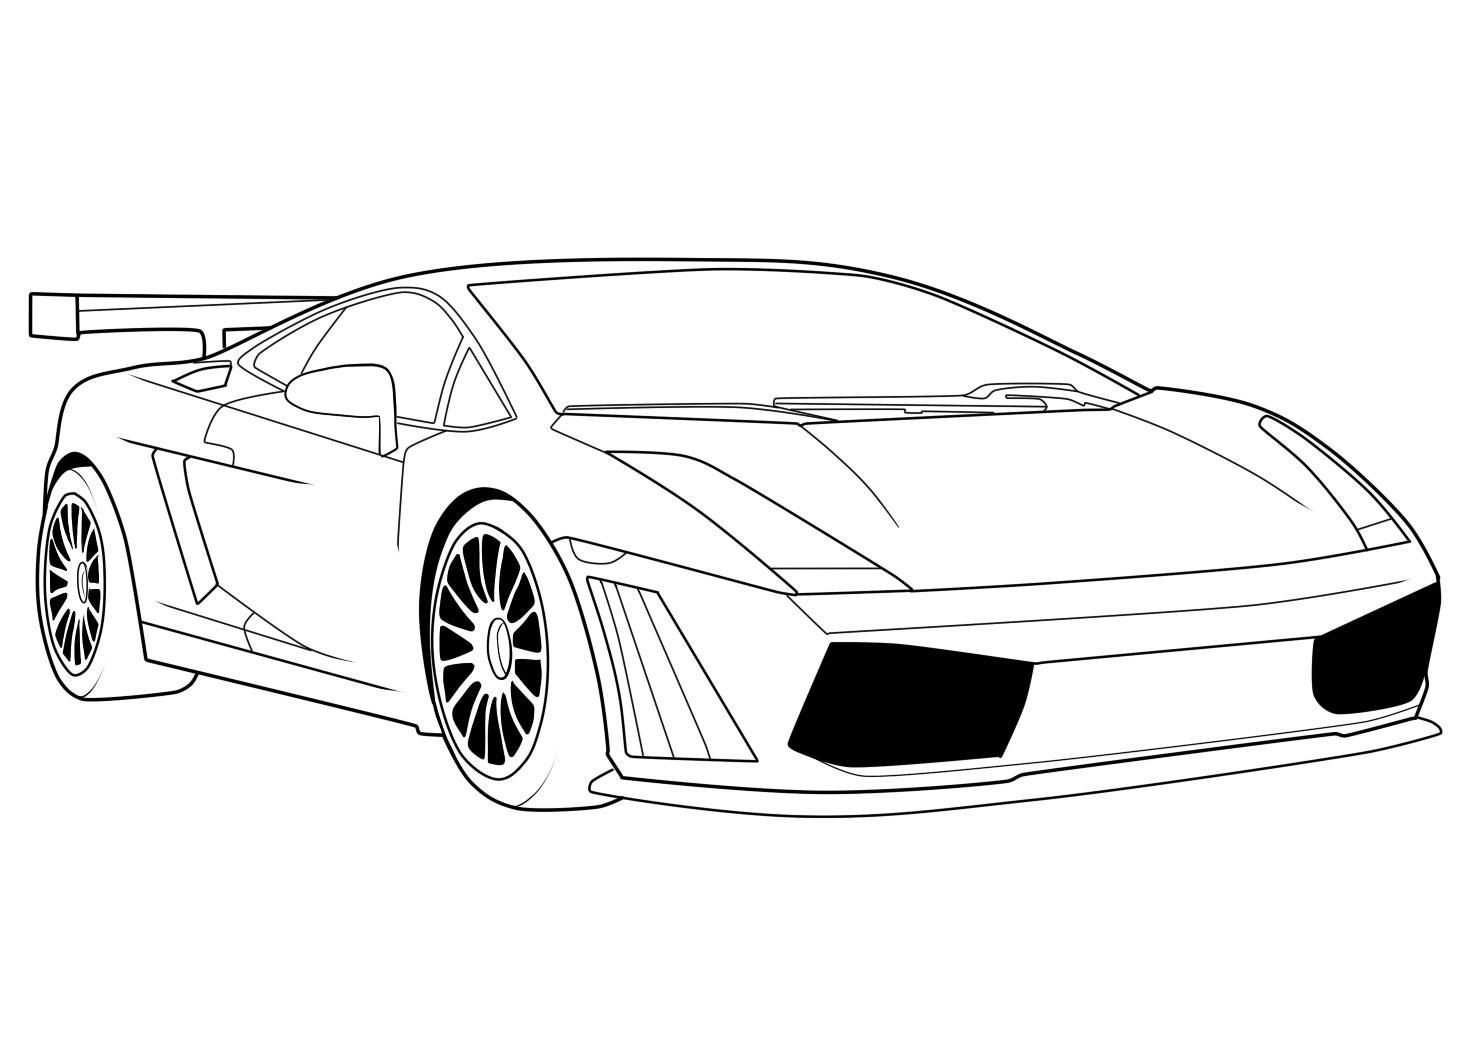 How To Draw Cars Easy With Images Car Drawings